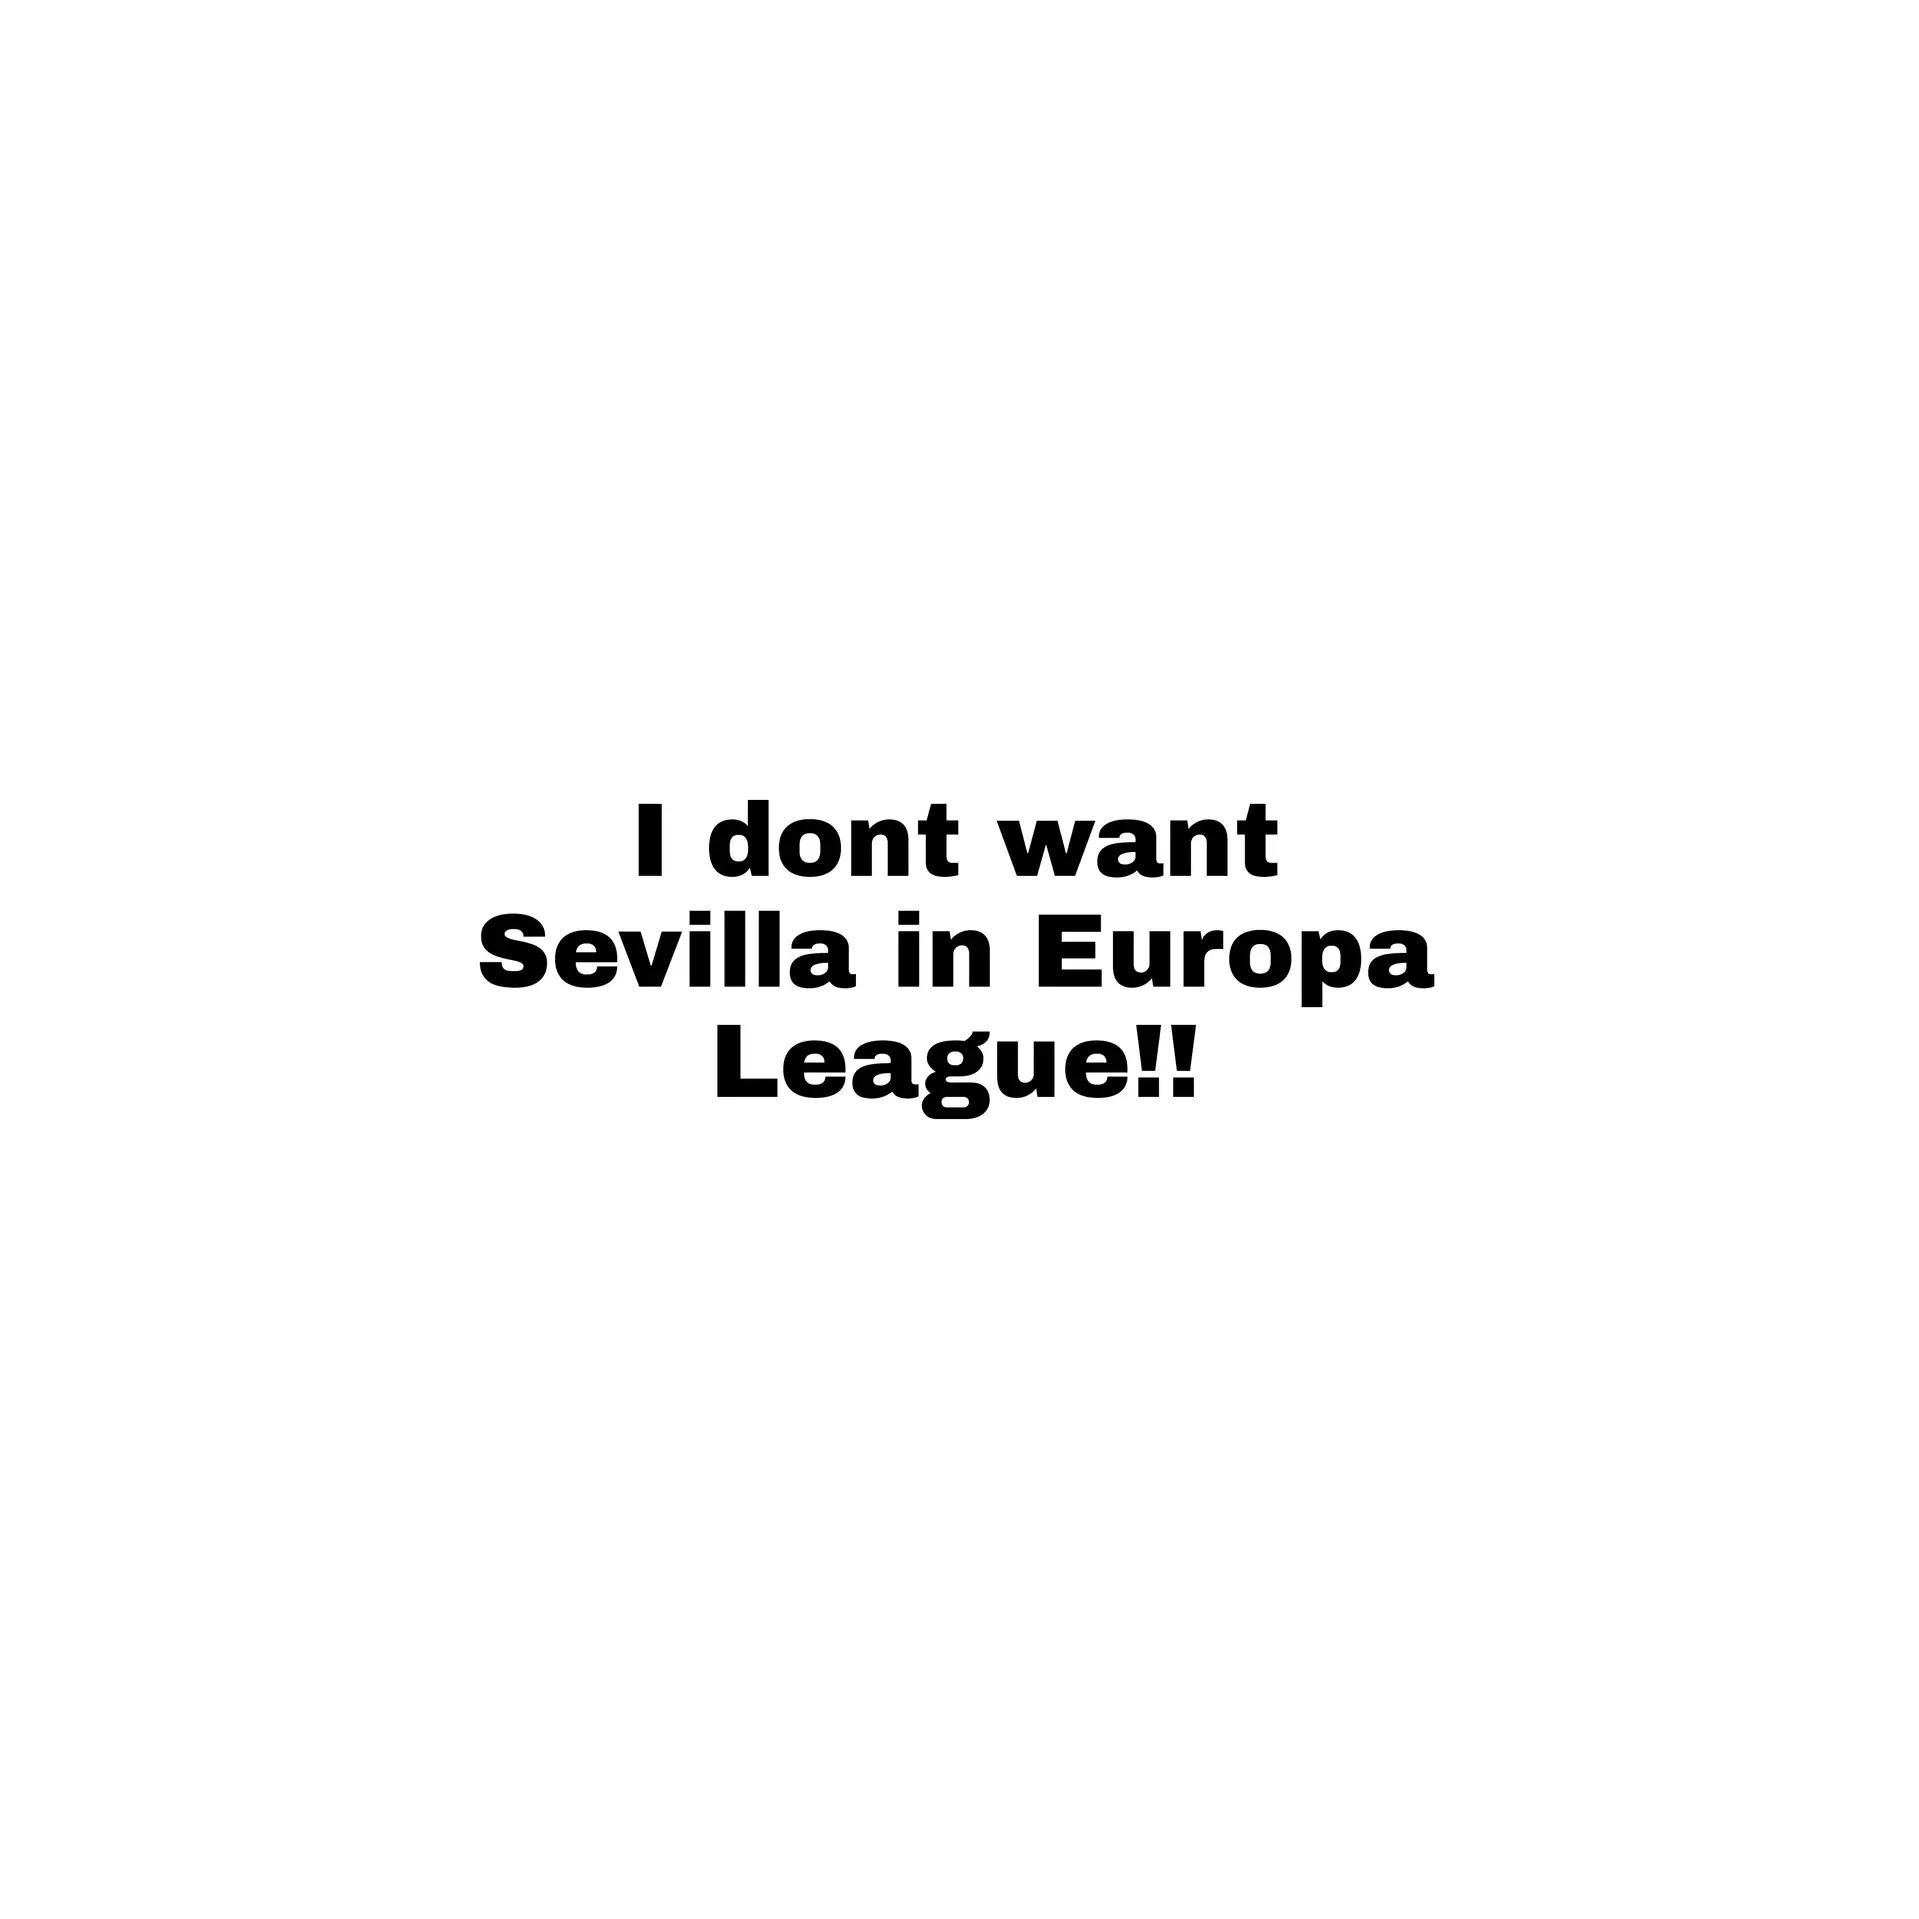 OMG SEVILLA HAS NOT QUALIFIED TO EUROPA LEAGUE! 